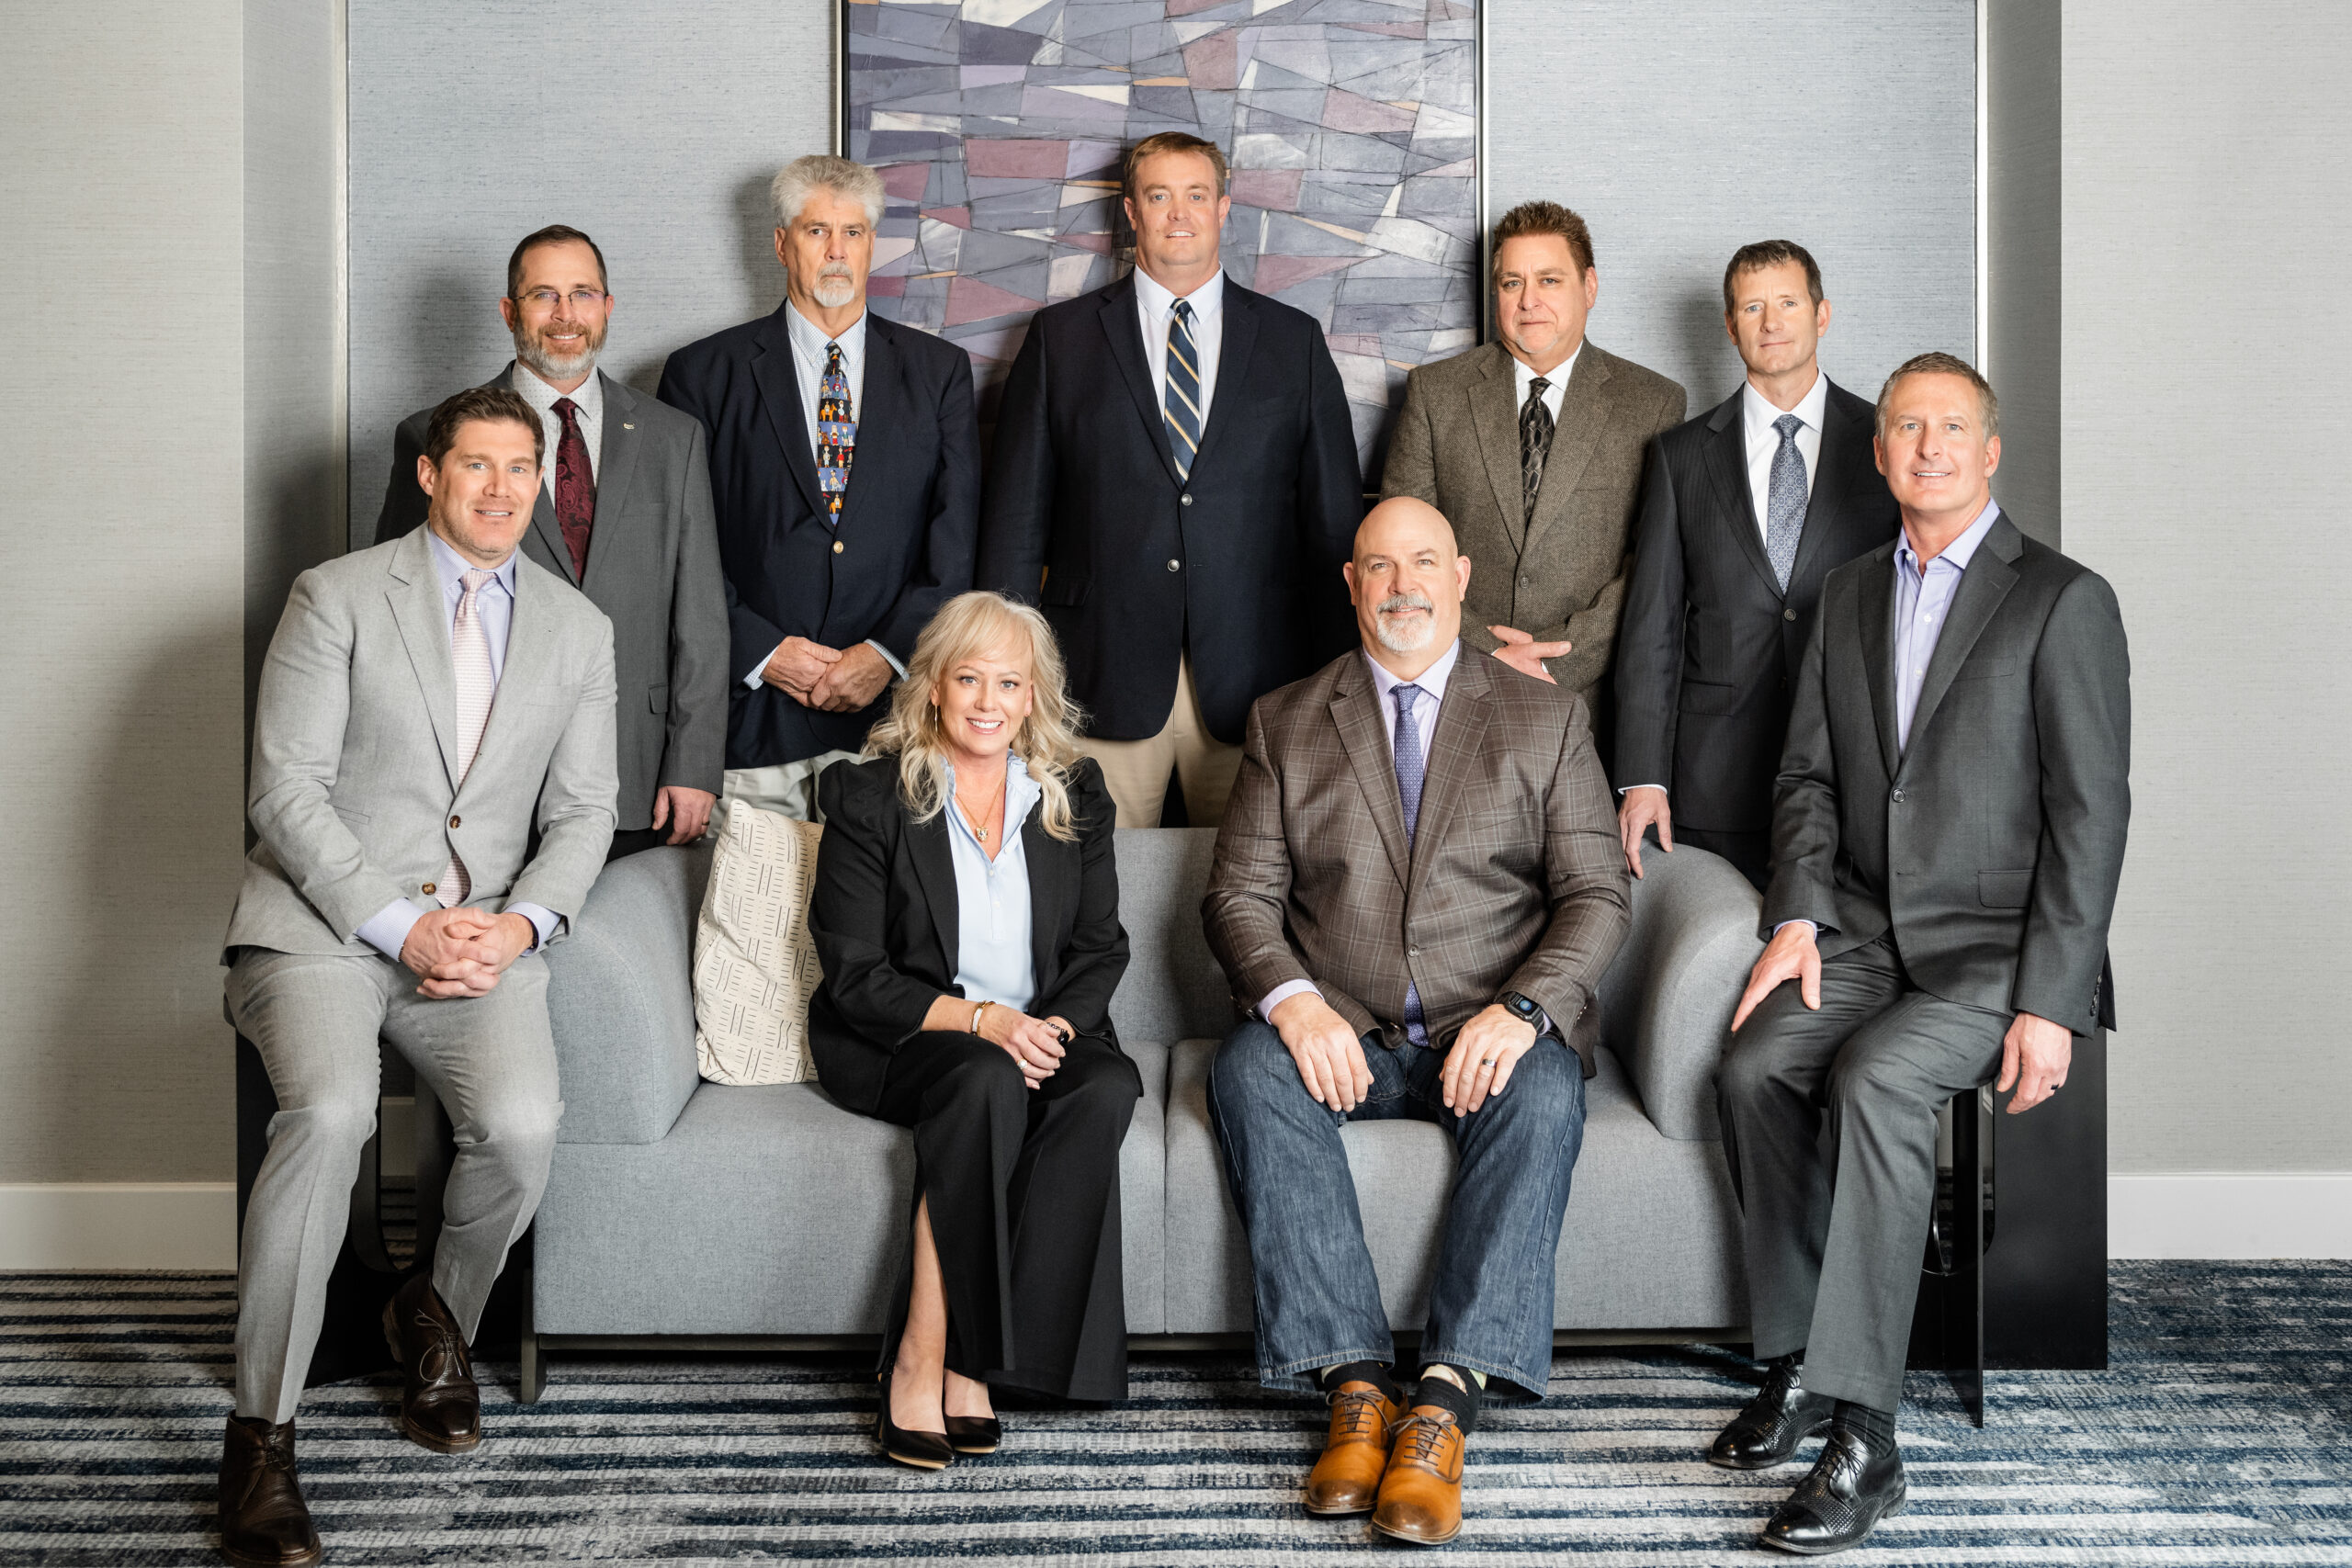 Image of Executive Committee